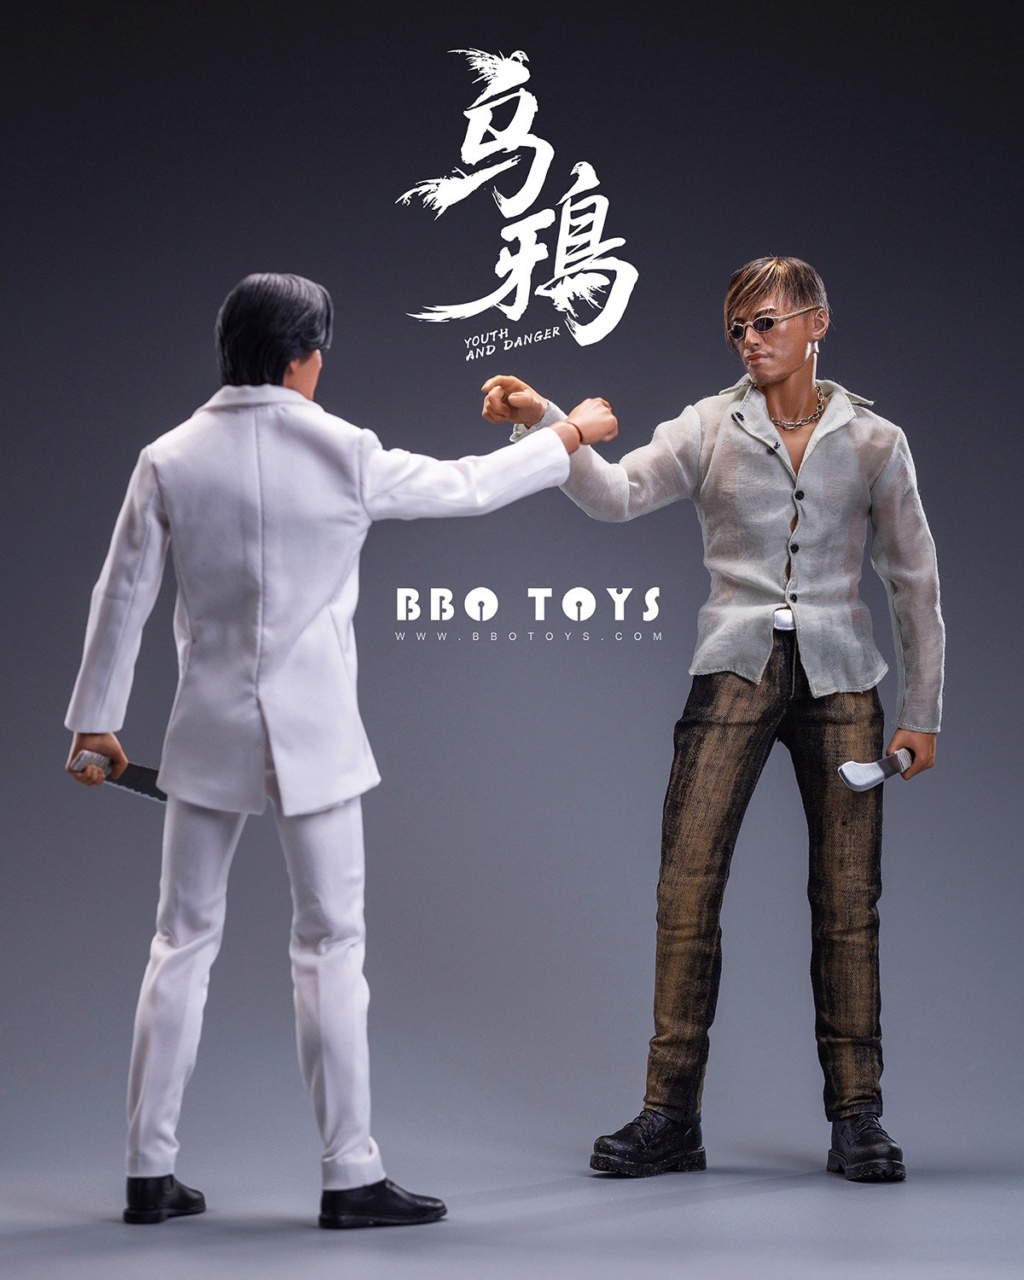 BBoToys - NEW PRODUCT: BBOTOYS: 1/6 Ancient and mysterious series Crow Glory GHZ004 8f1cce10